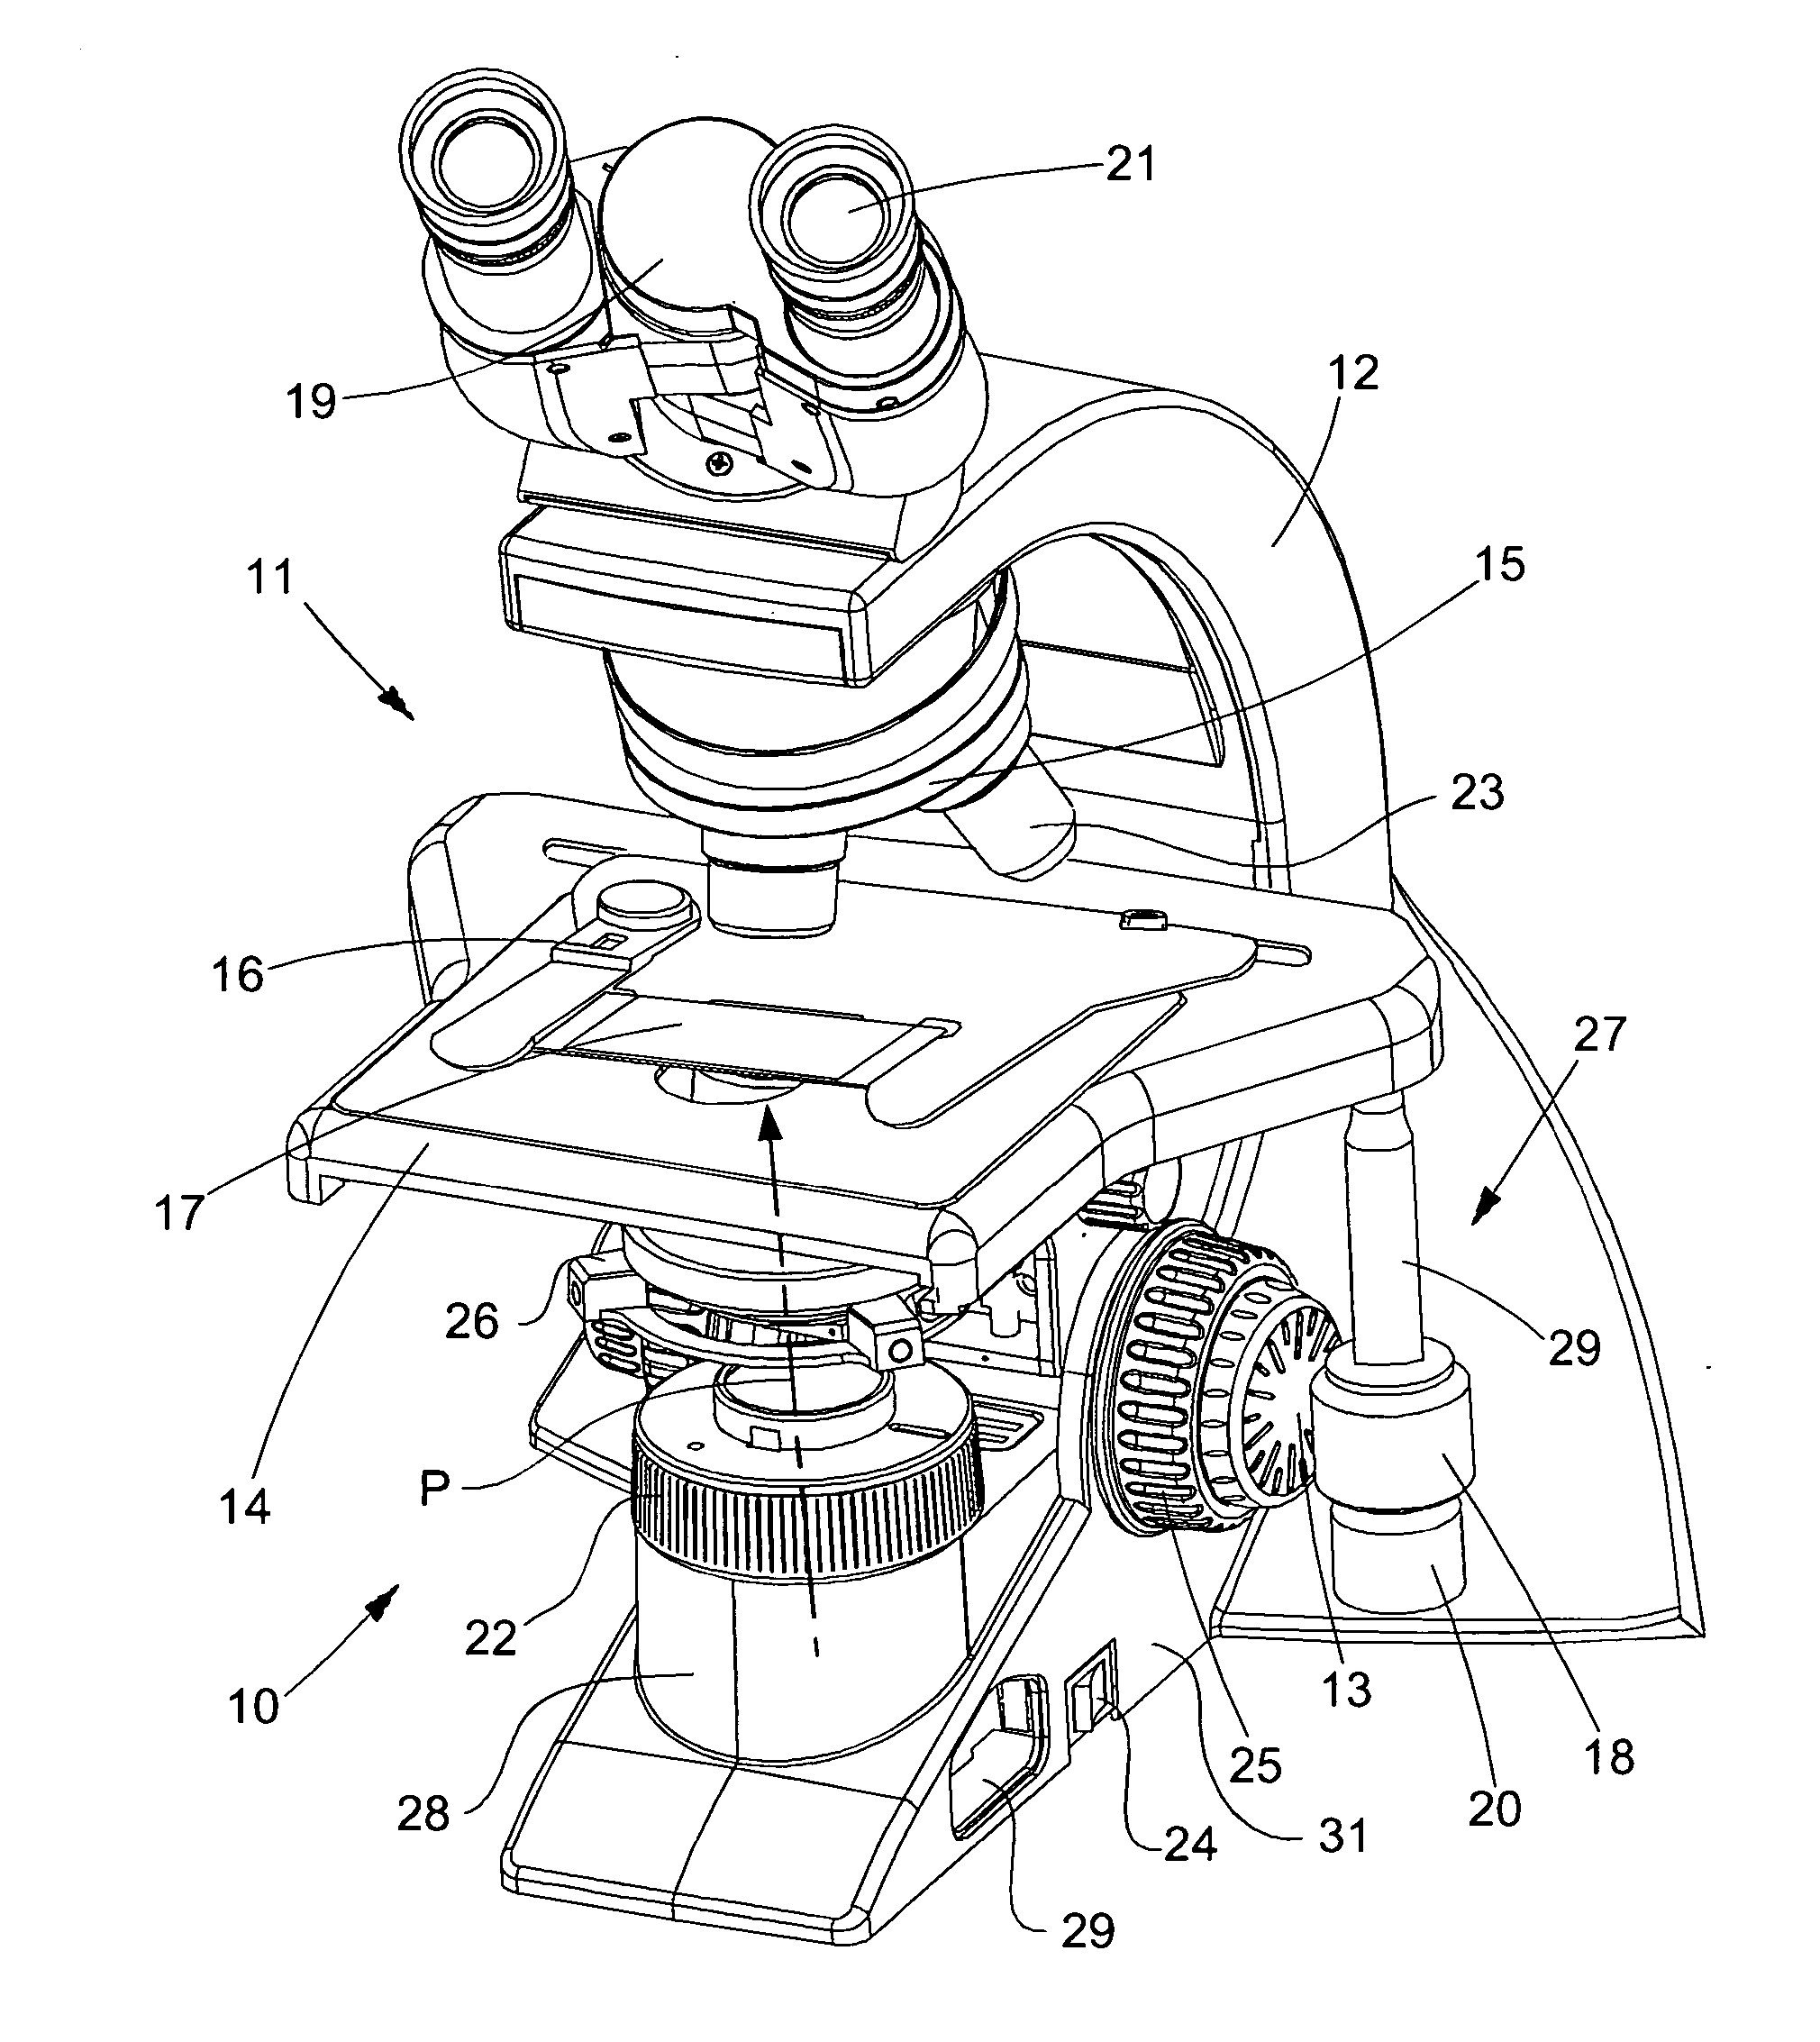 Lamp assembly for a microscope